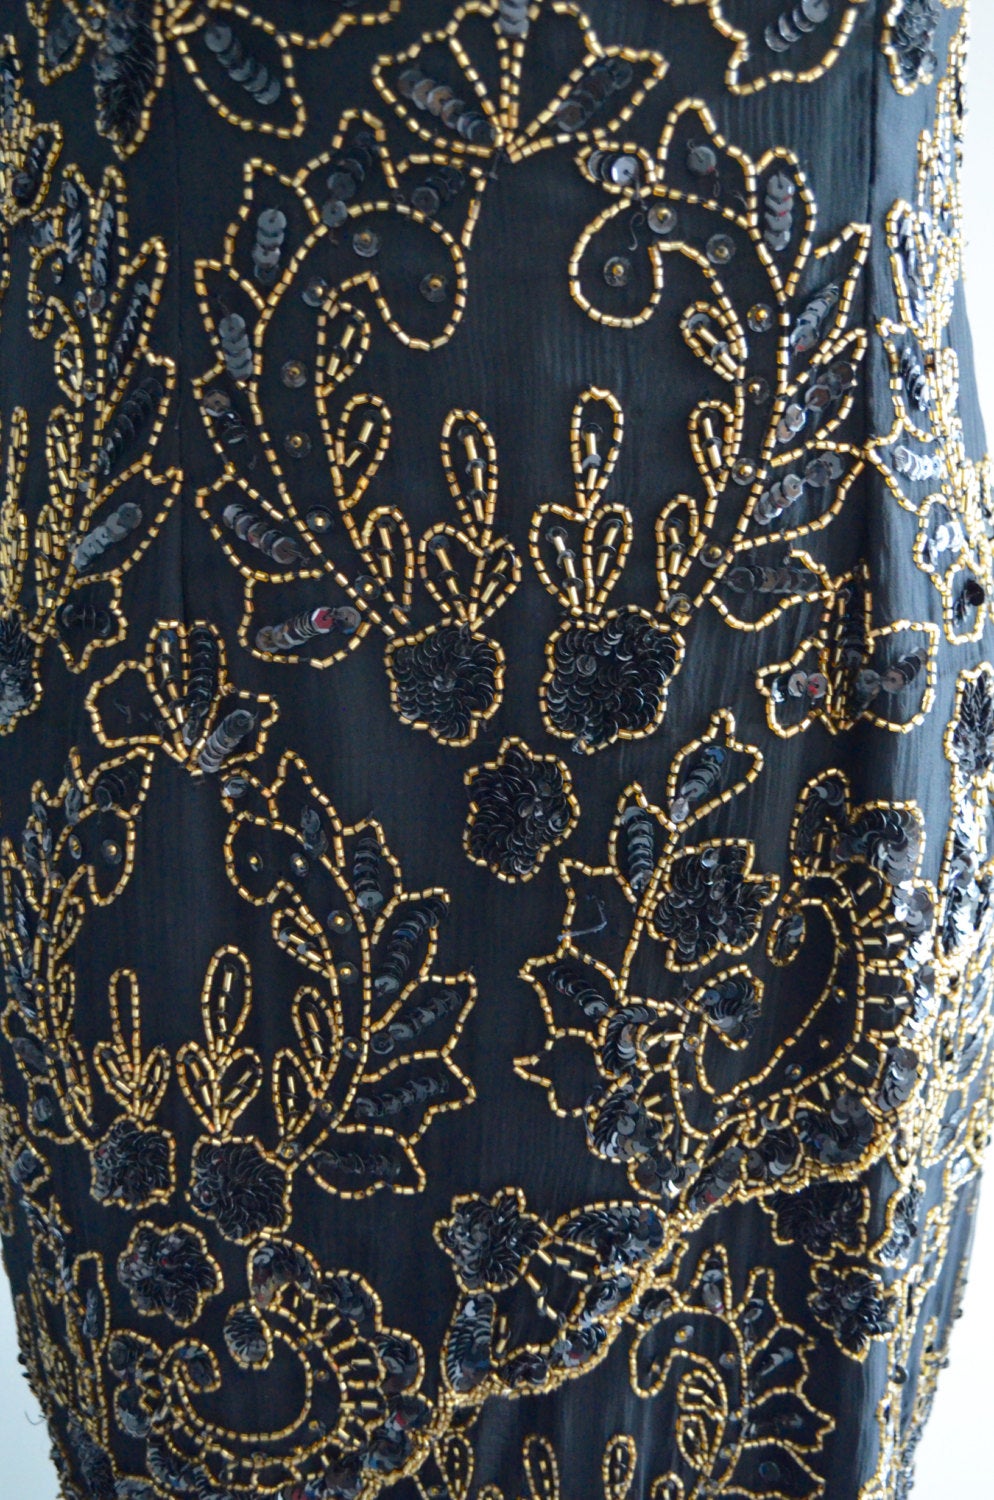 Cocktail Sequined Black And Gold Flower Boho Chic Beaded Gatsby Cocktail Dress